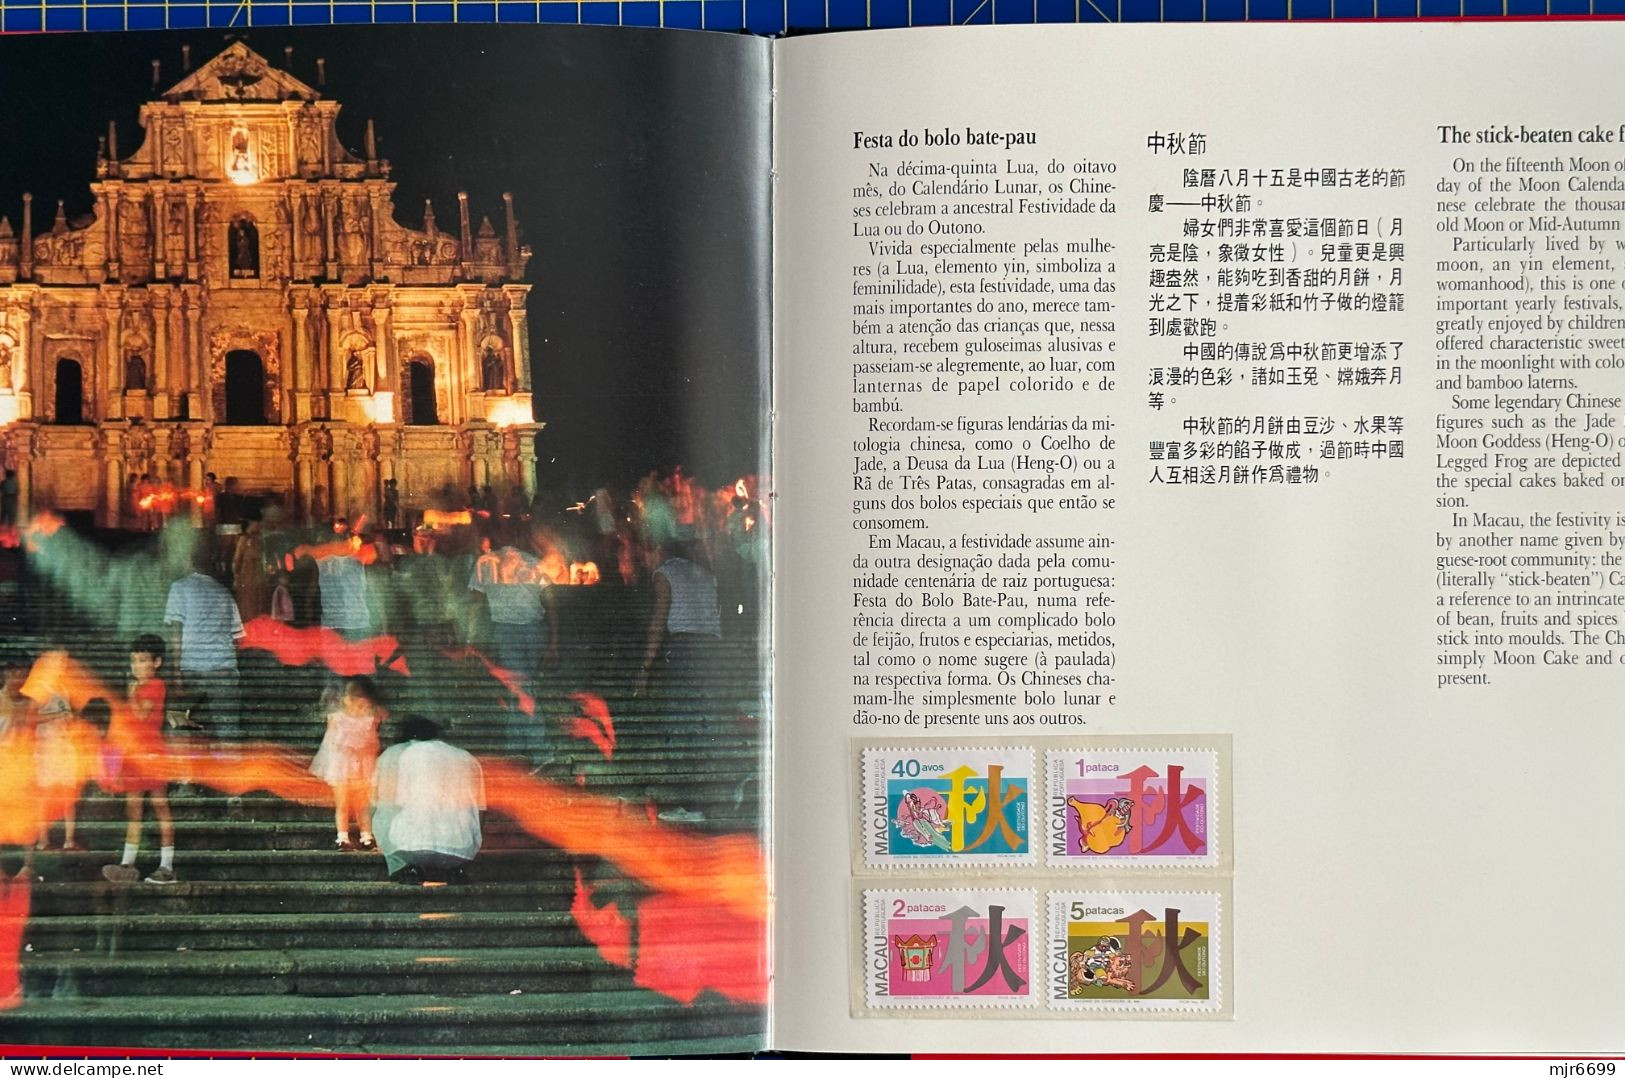 1989 BOOK "SELOS, UMA FORMA DE EXPRESSÃO" "AN EXPRESSION IN STAMPS" WITH 66 PAGES, WITH STAMPS, VERY FINE CONDITIONSmore